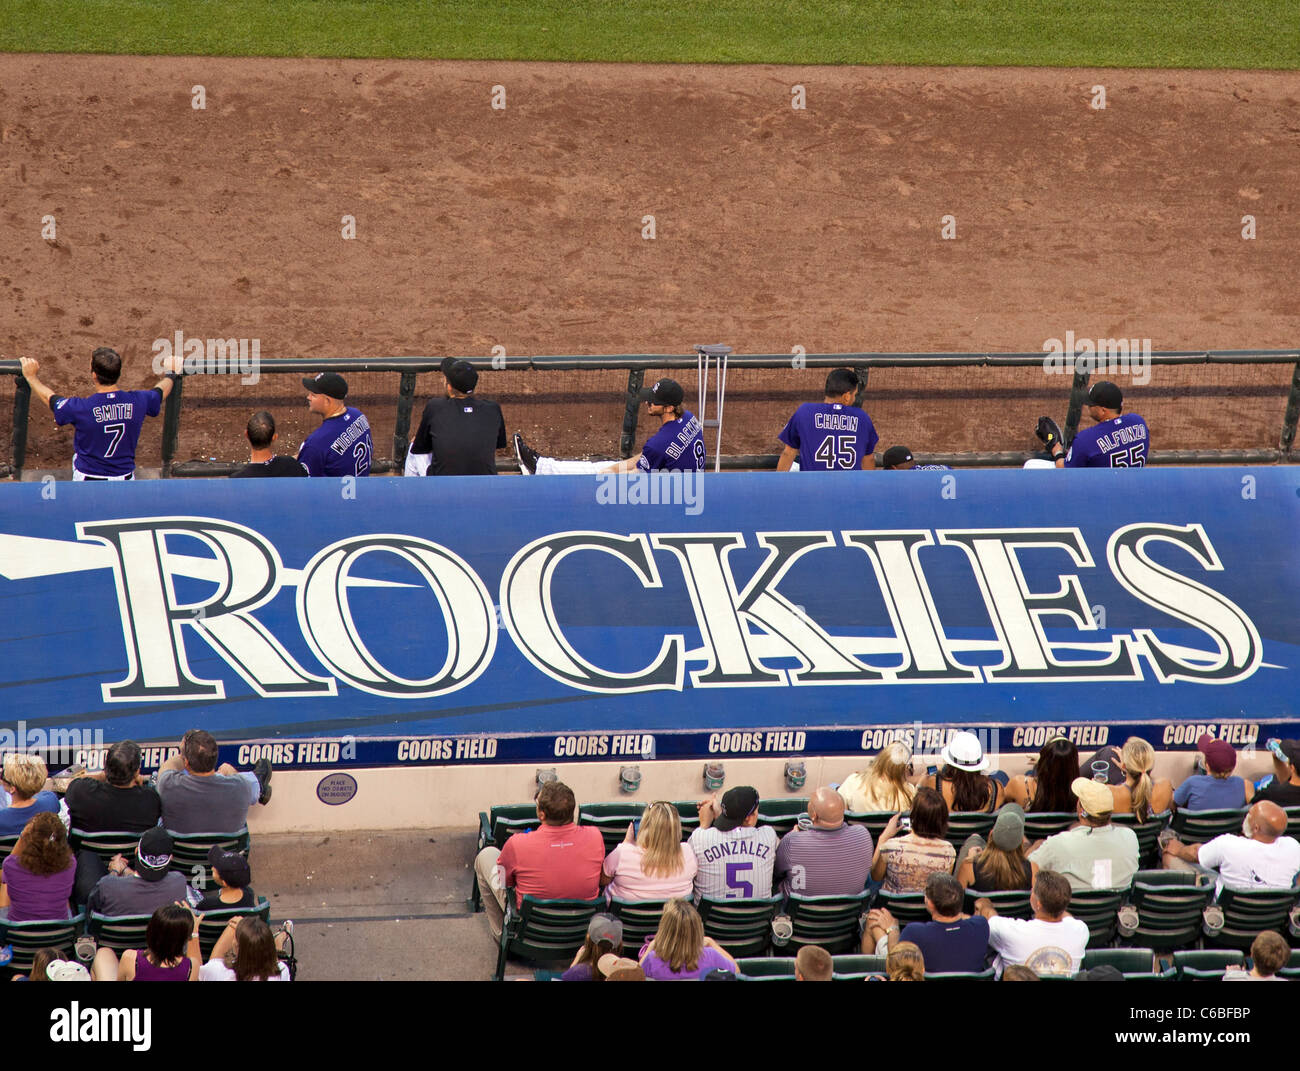 Rockies Dugout Stores are fully stocked - Colorado Rockies